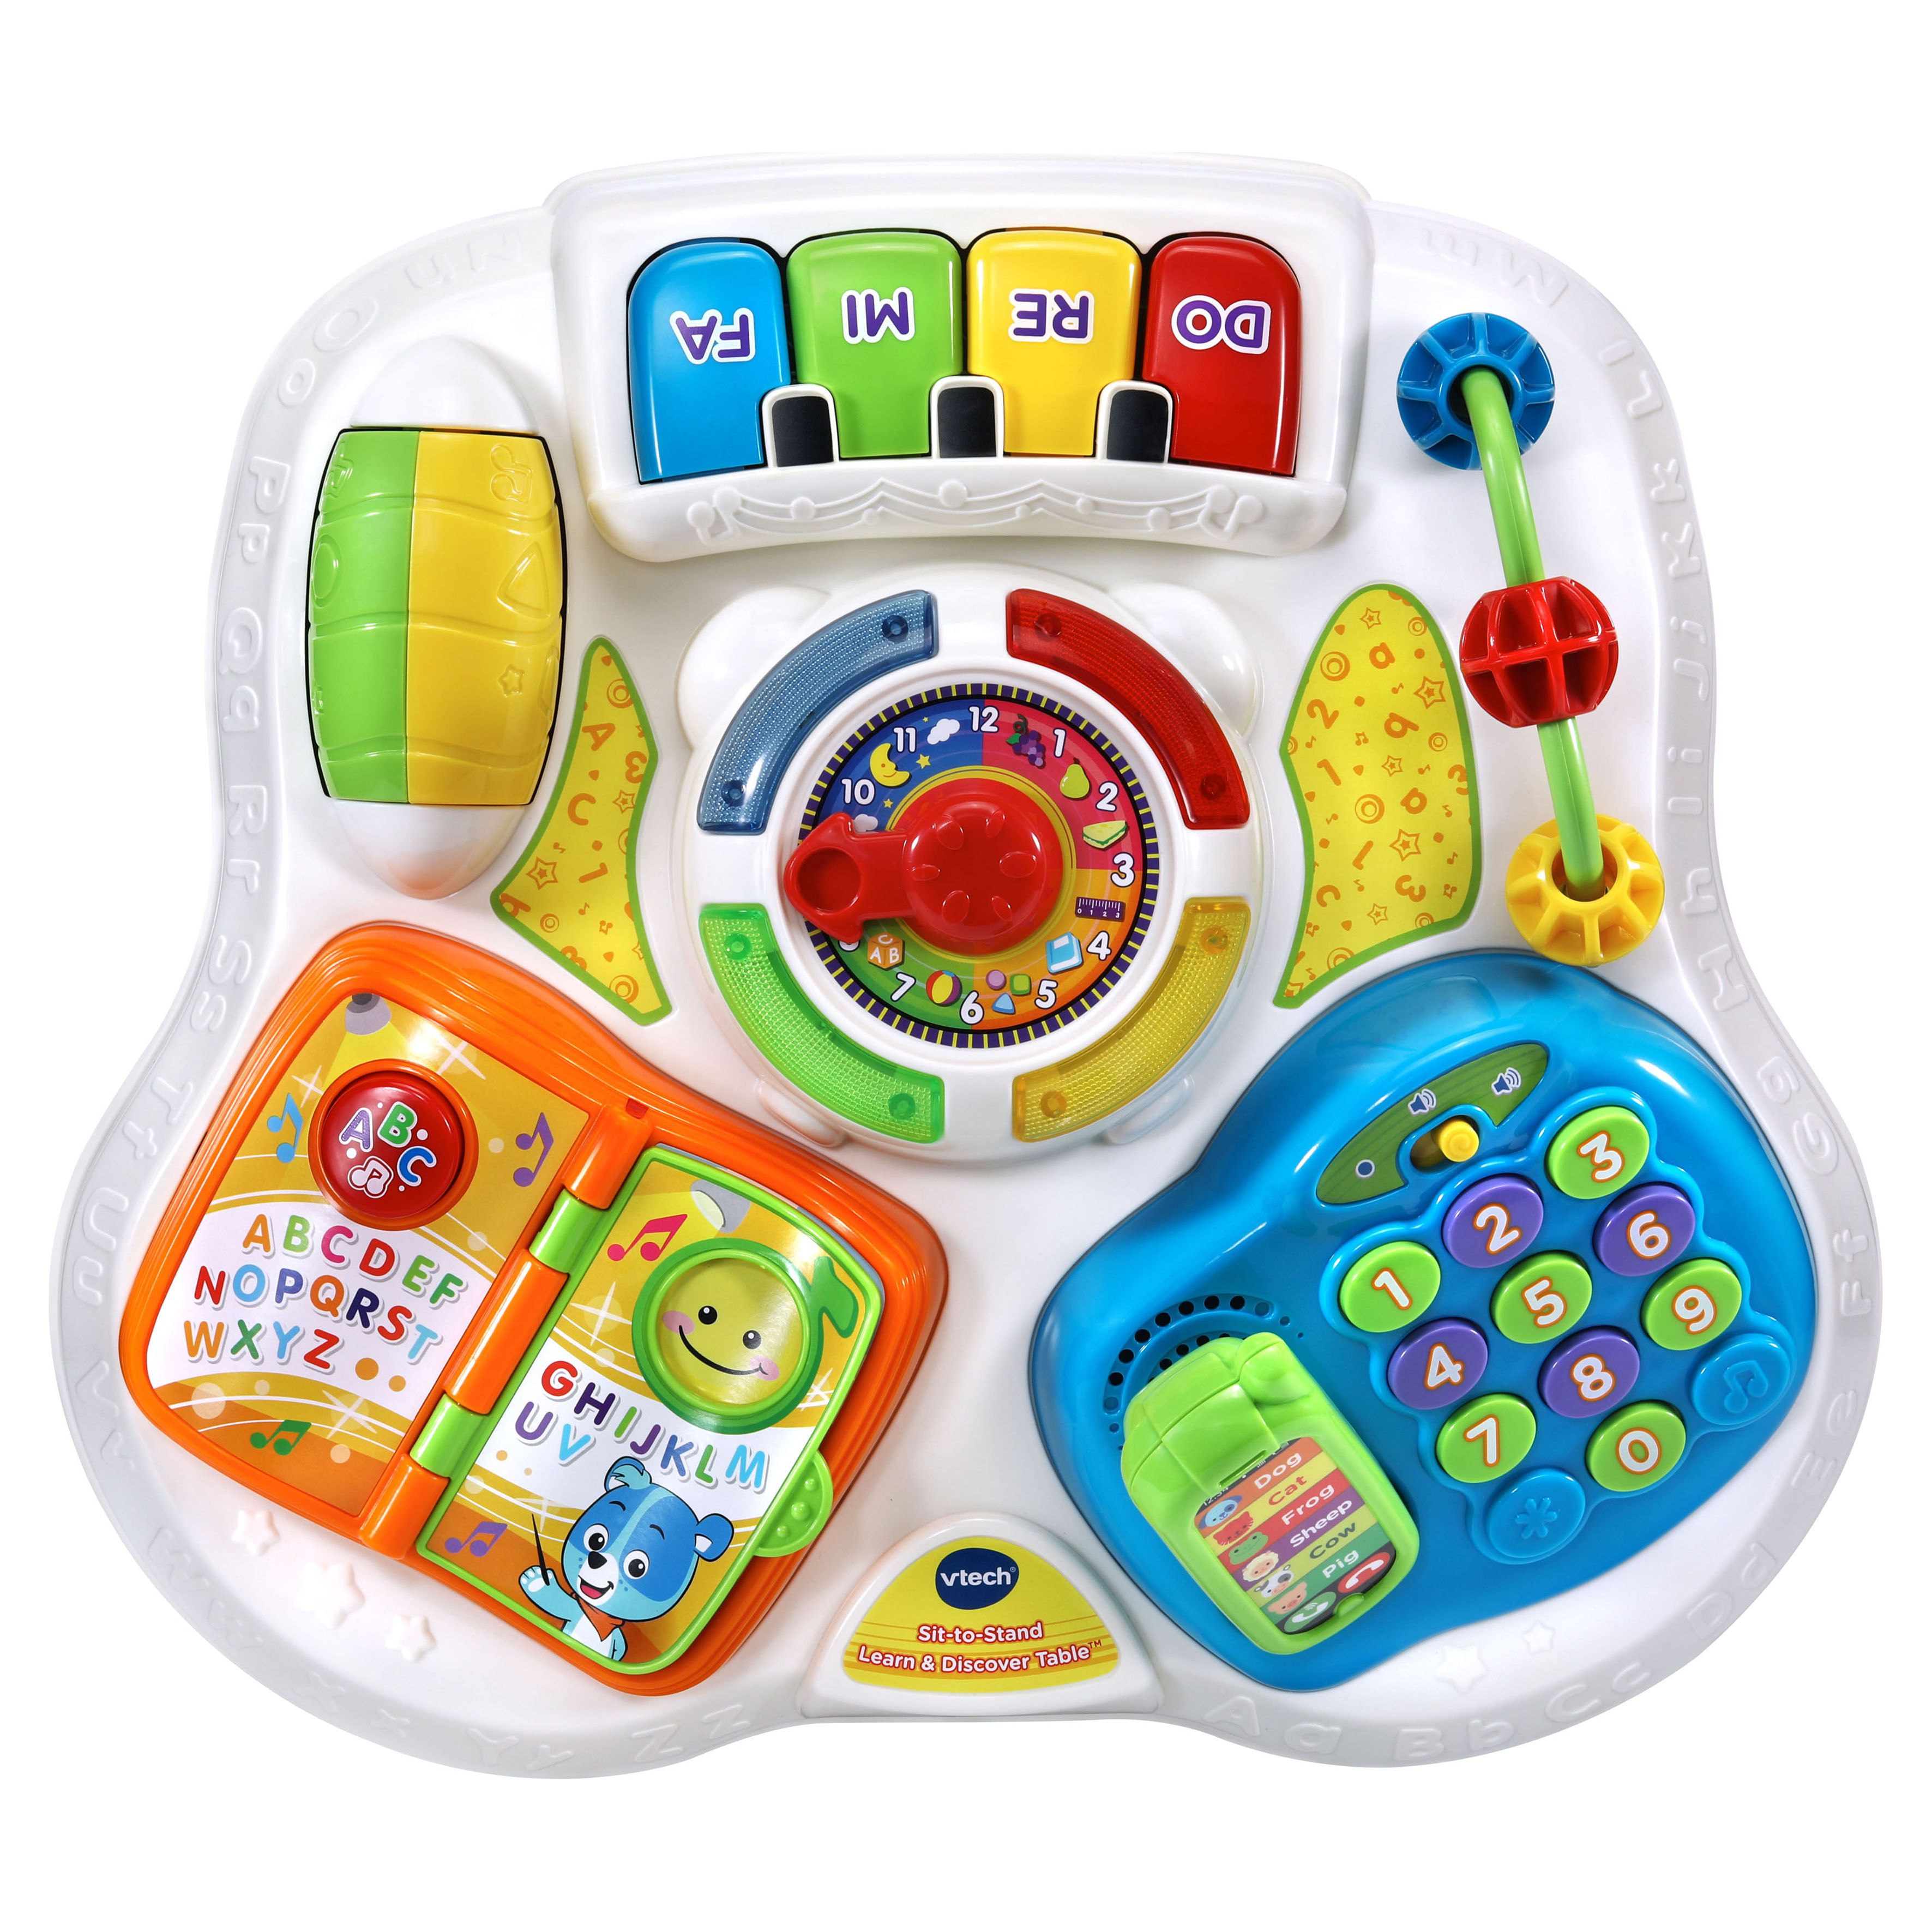 VTech Sit-to-Stand Learn and Discover Table, Activity Toy for Baby - image 5 of 9